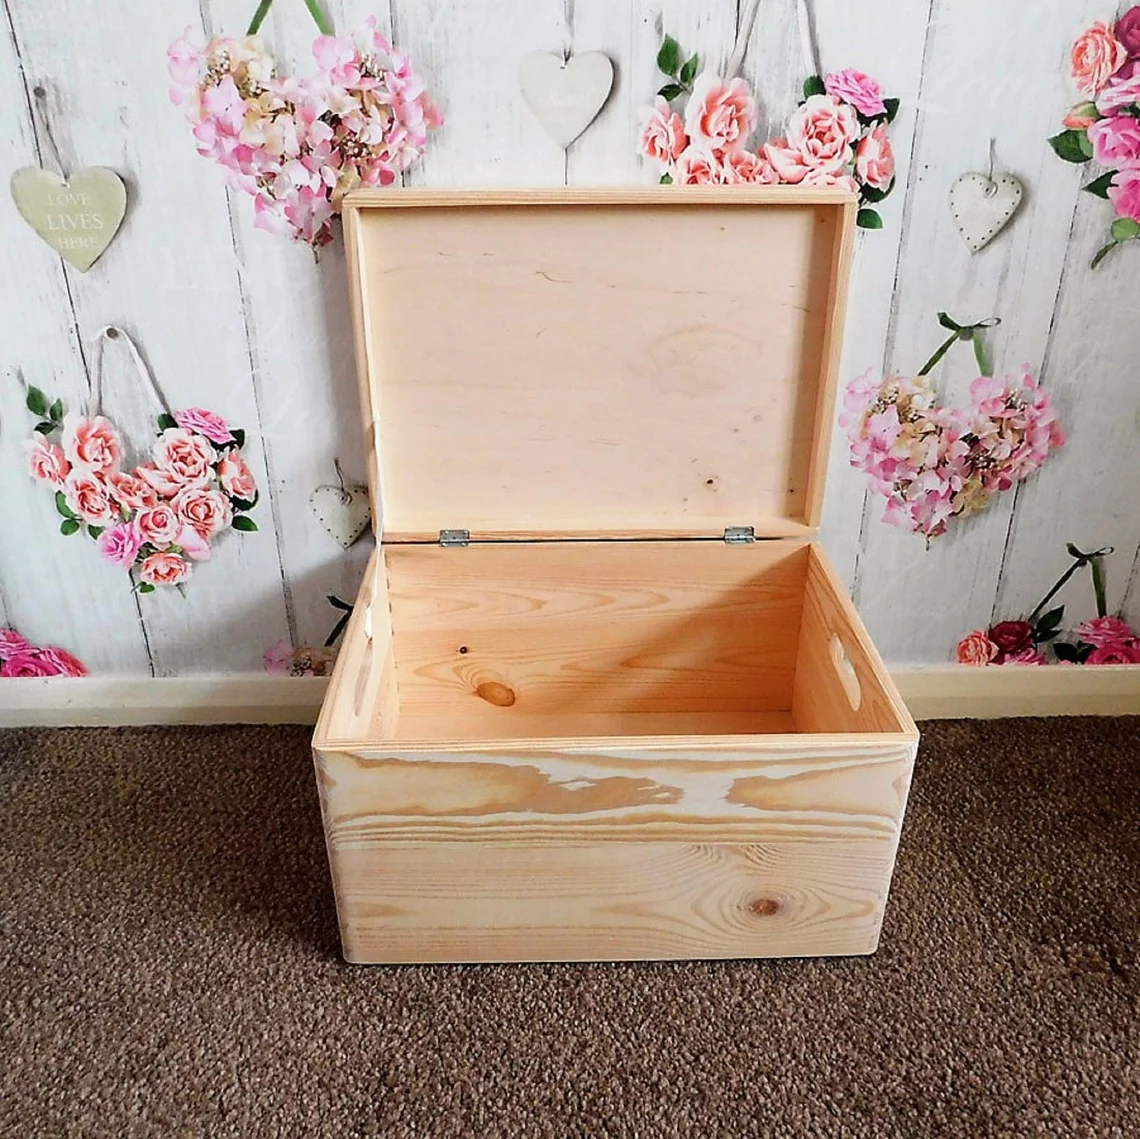 Large Plain Wooden Storage Box With Hinged Lid & Handles - Open Box